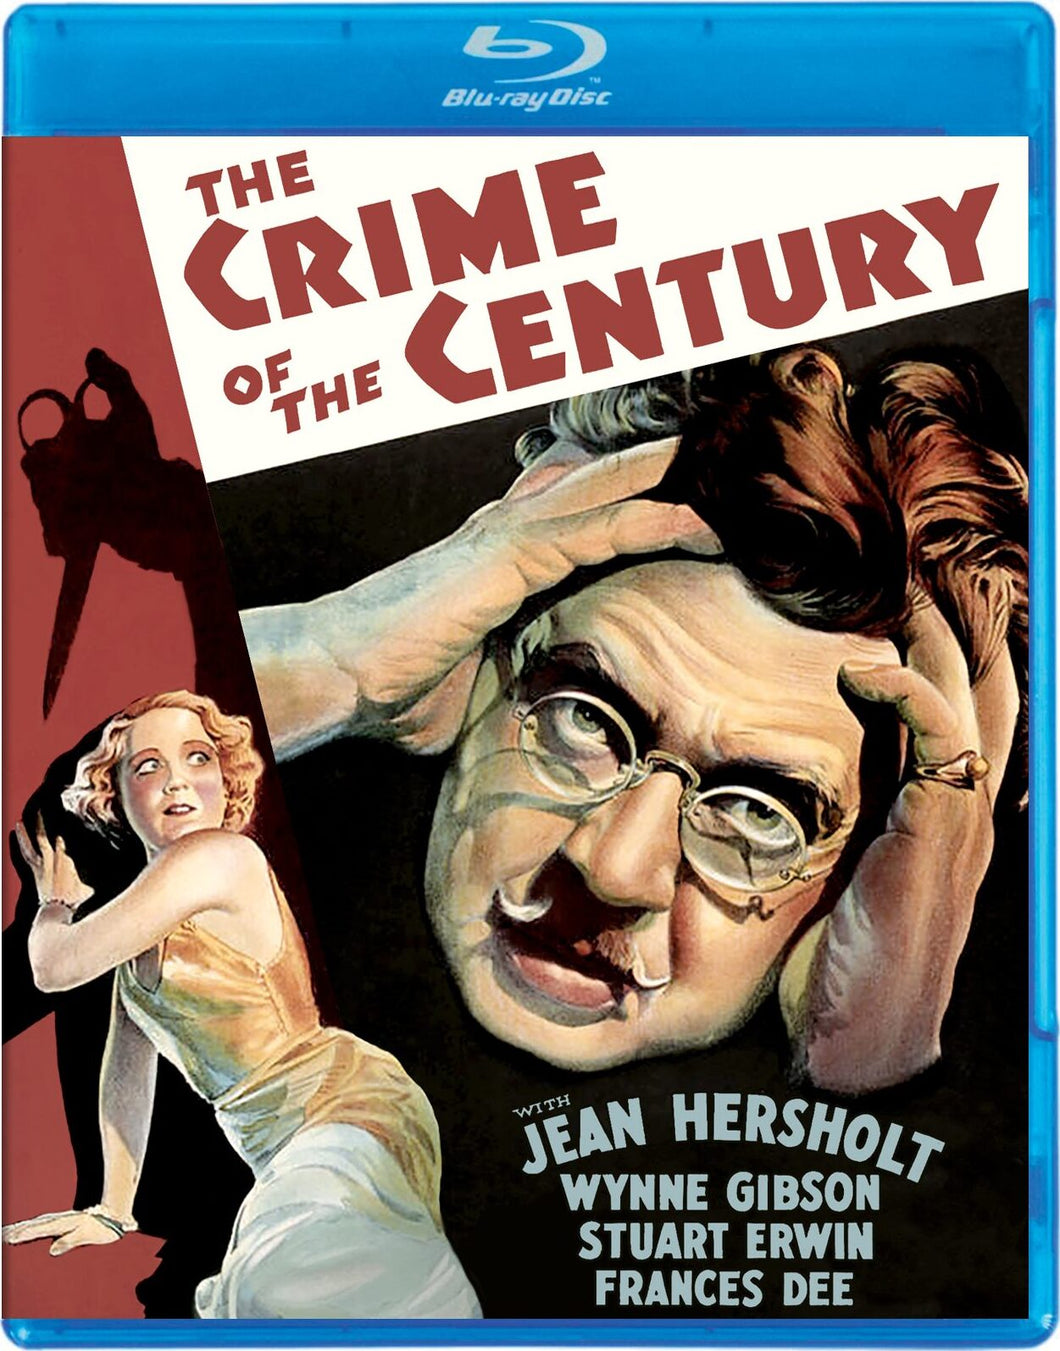 The Crime of the Century (1933) de William Beaudine - front cover